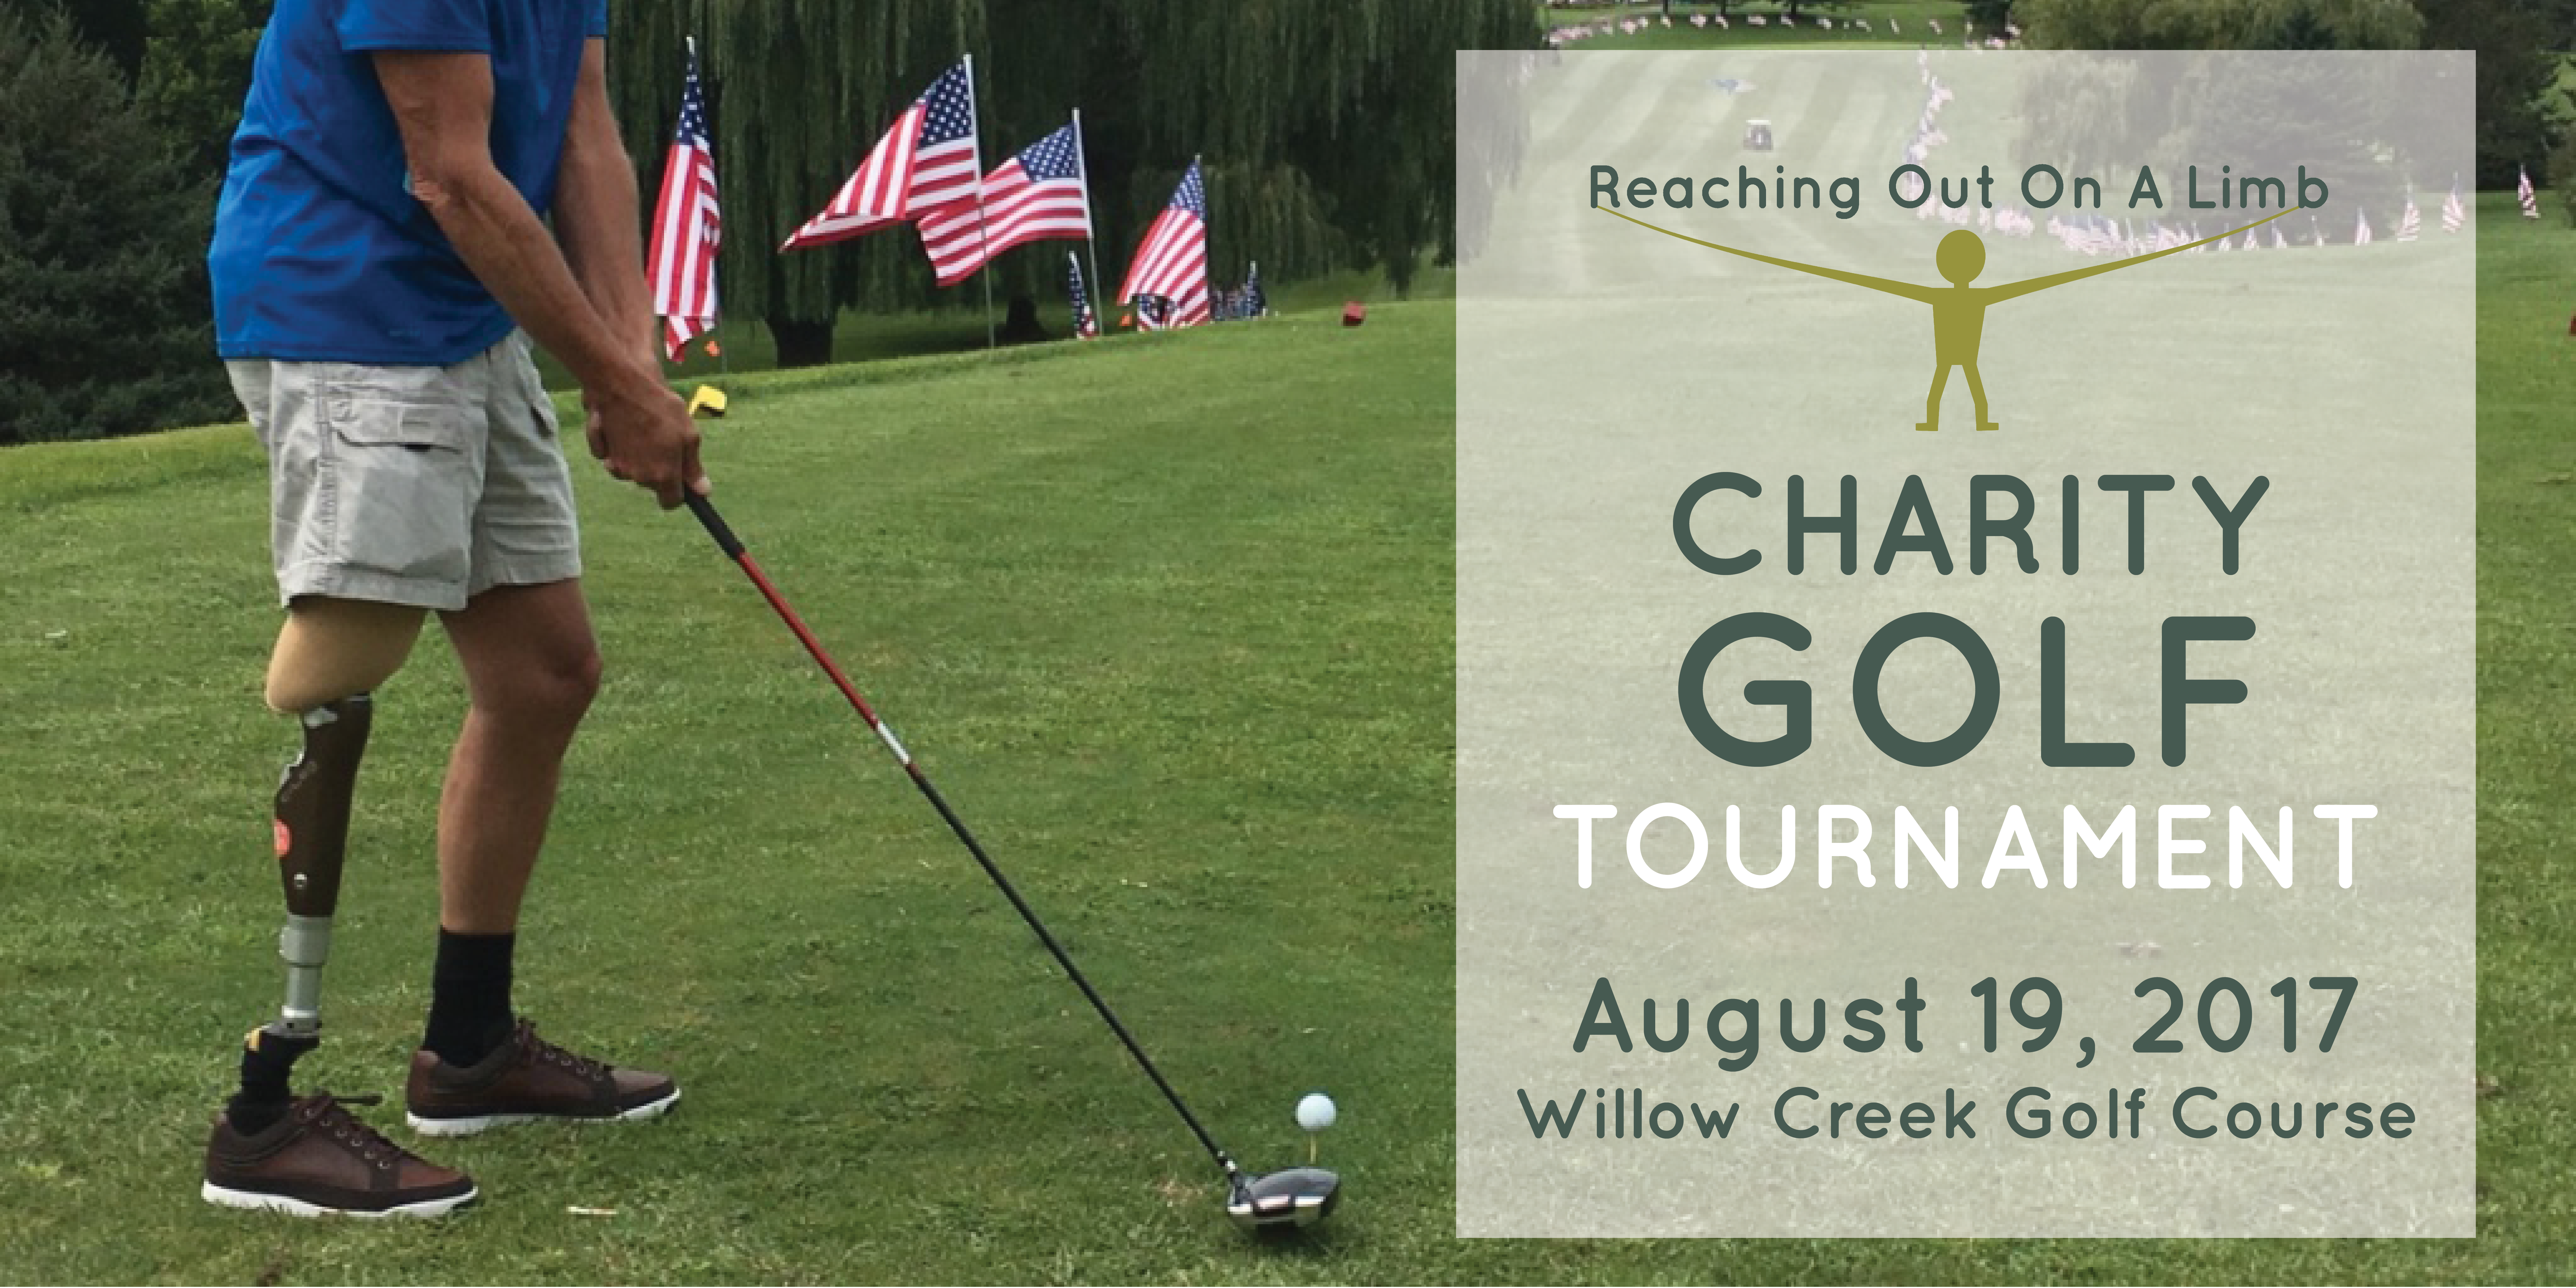 Charity Golf Outing - Reaching Out On A Limb